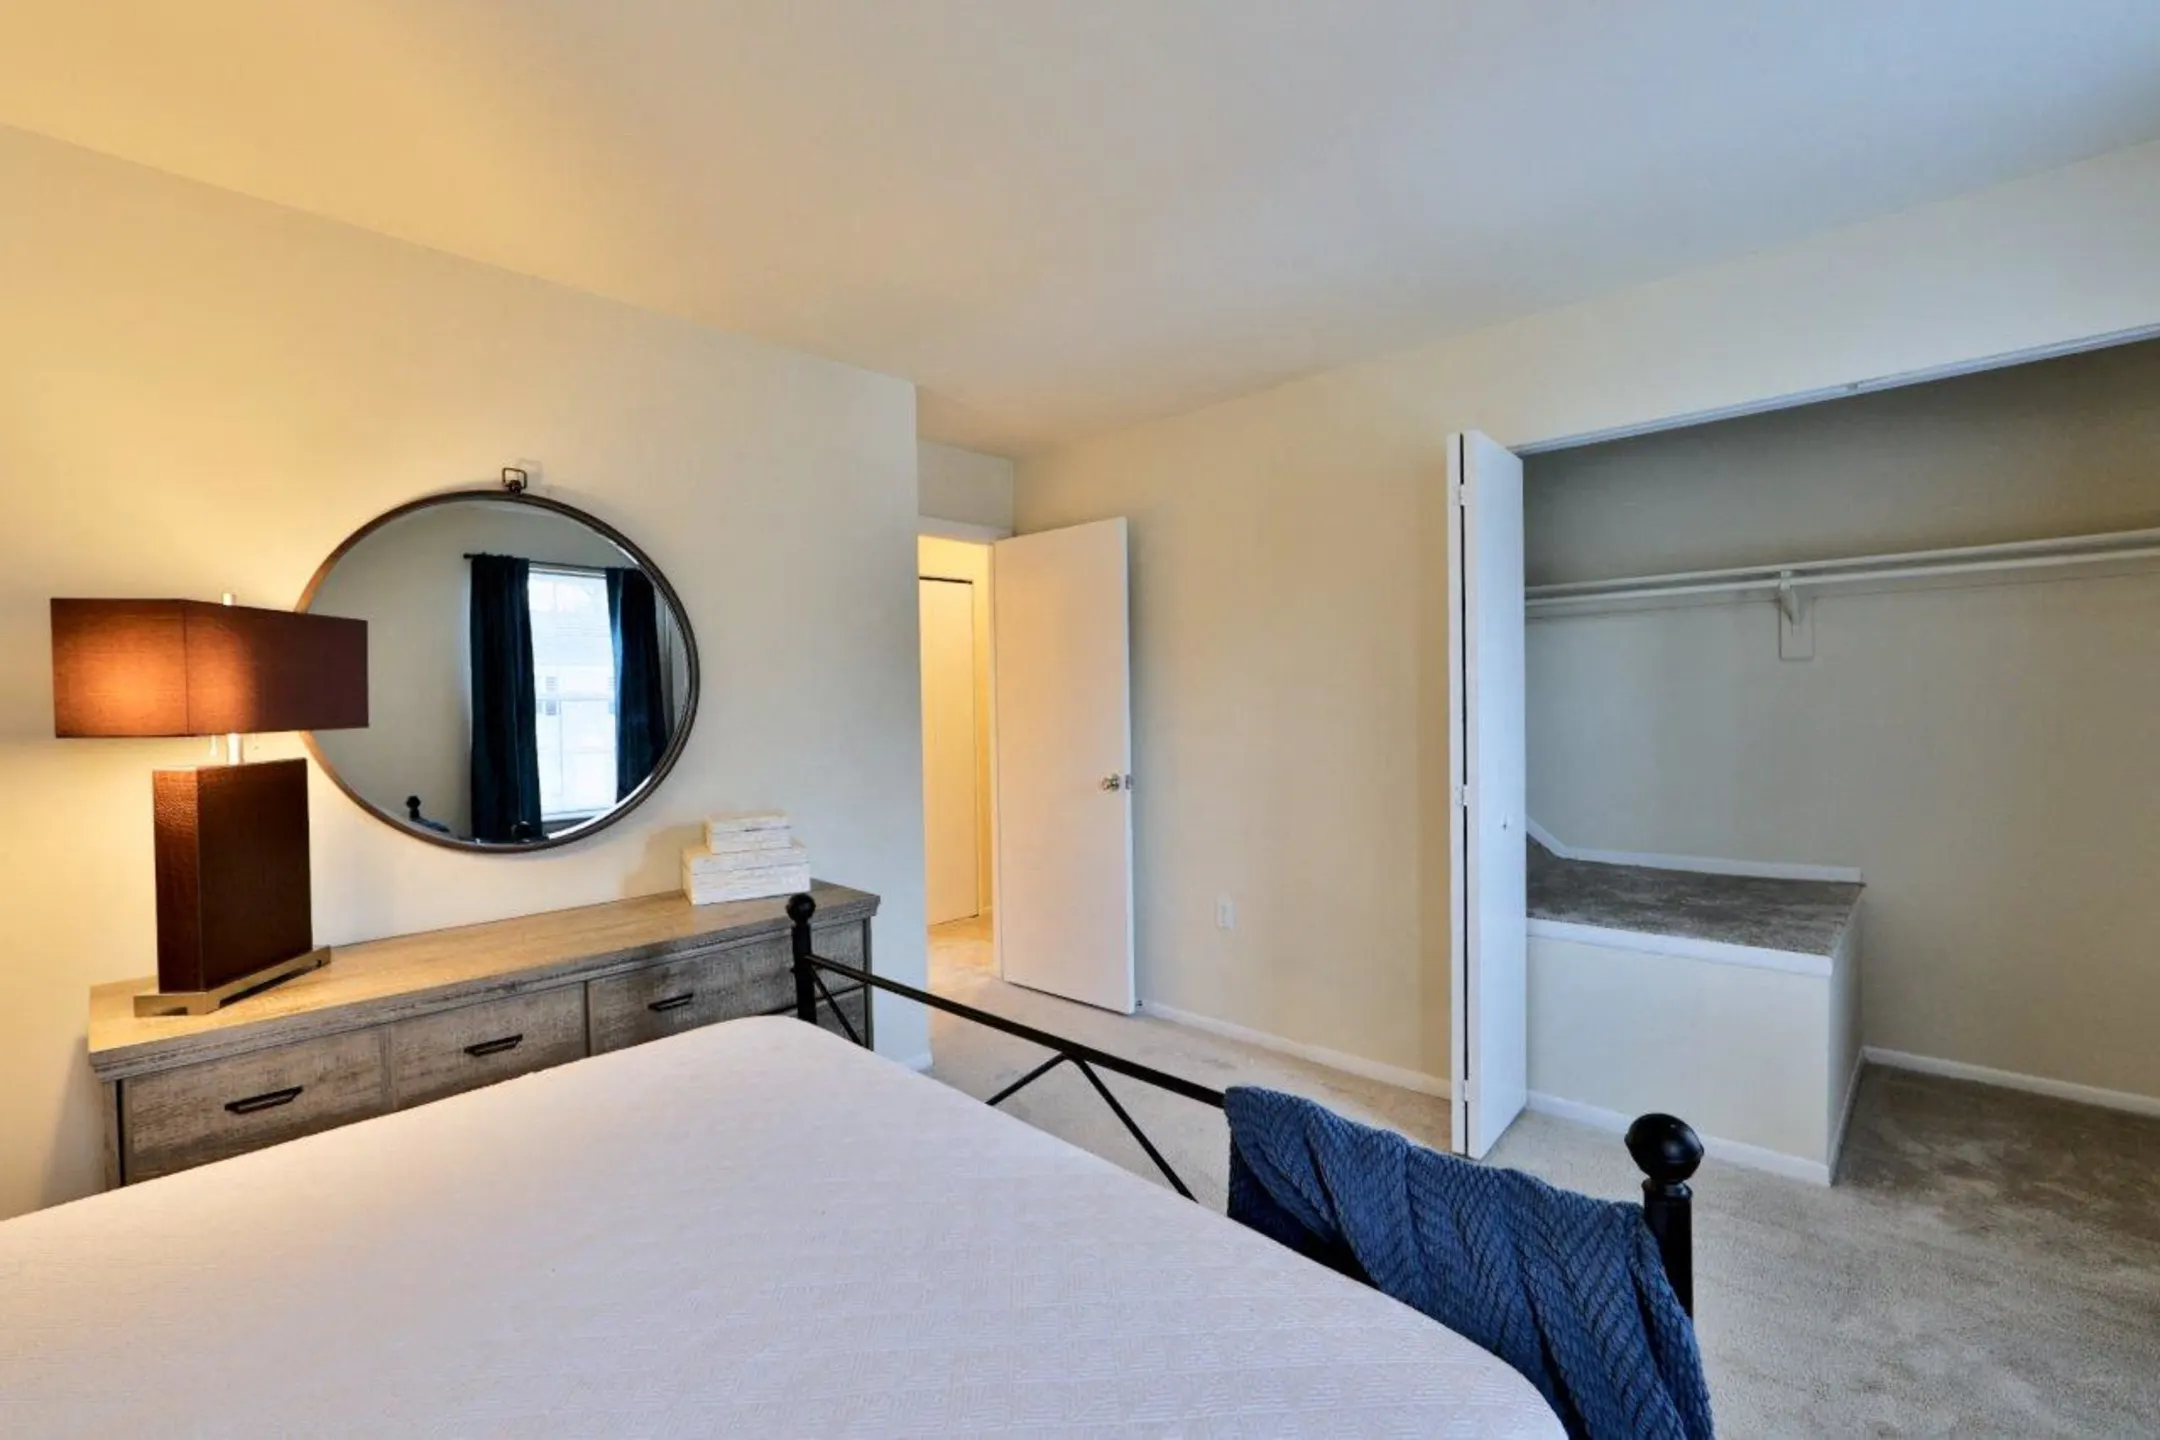 Bedroom - The Townhomes at Diamond Ridge - Windsor Mill, MD